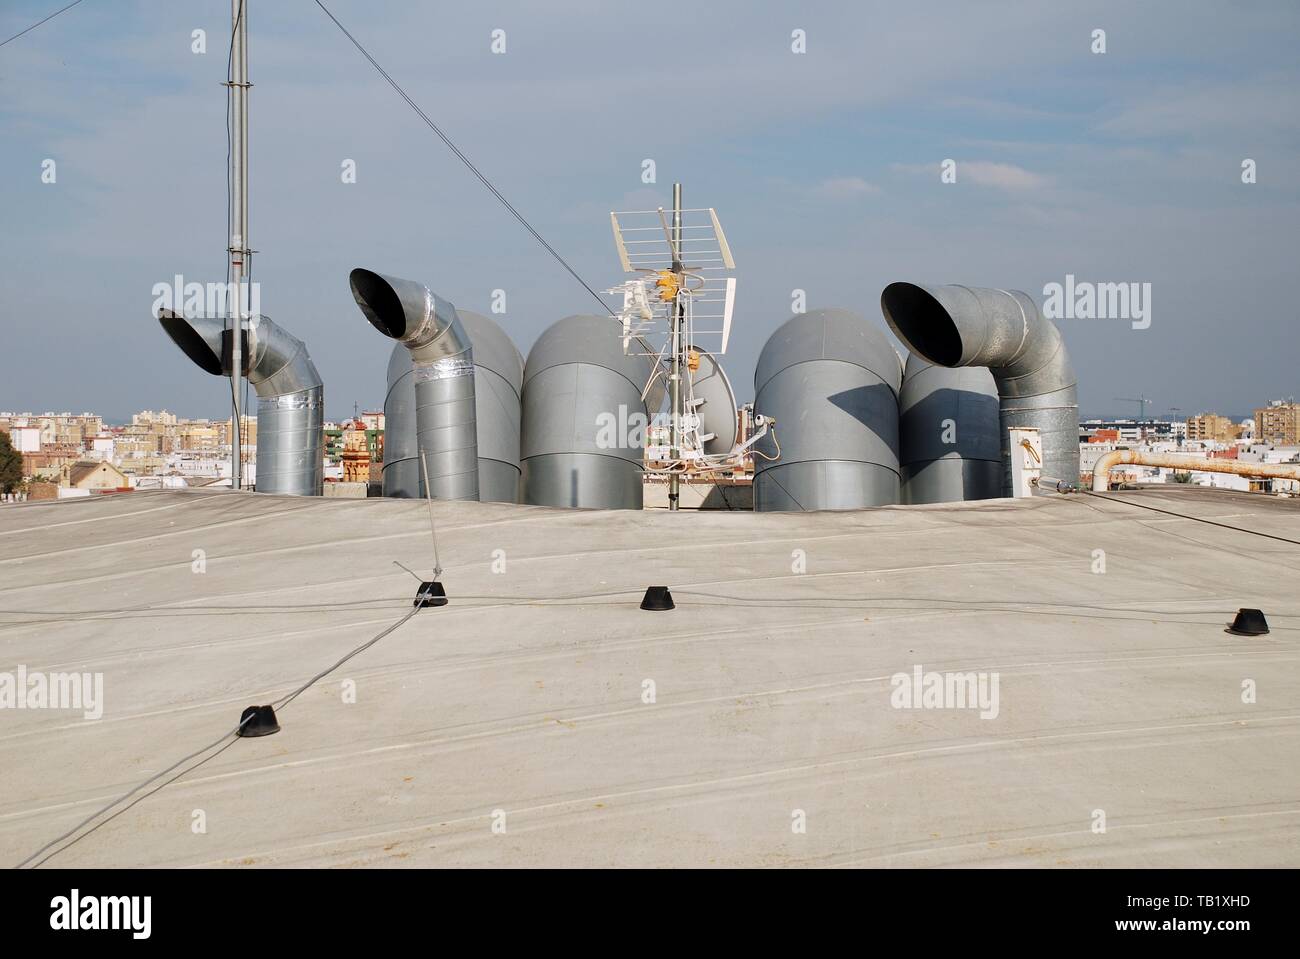 Ventilation ducts on the roof of the Metropol Parasol in Seville, Spain on April 2, 2019. Stock Photo